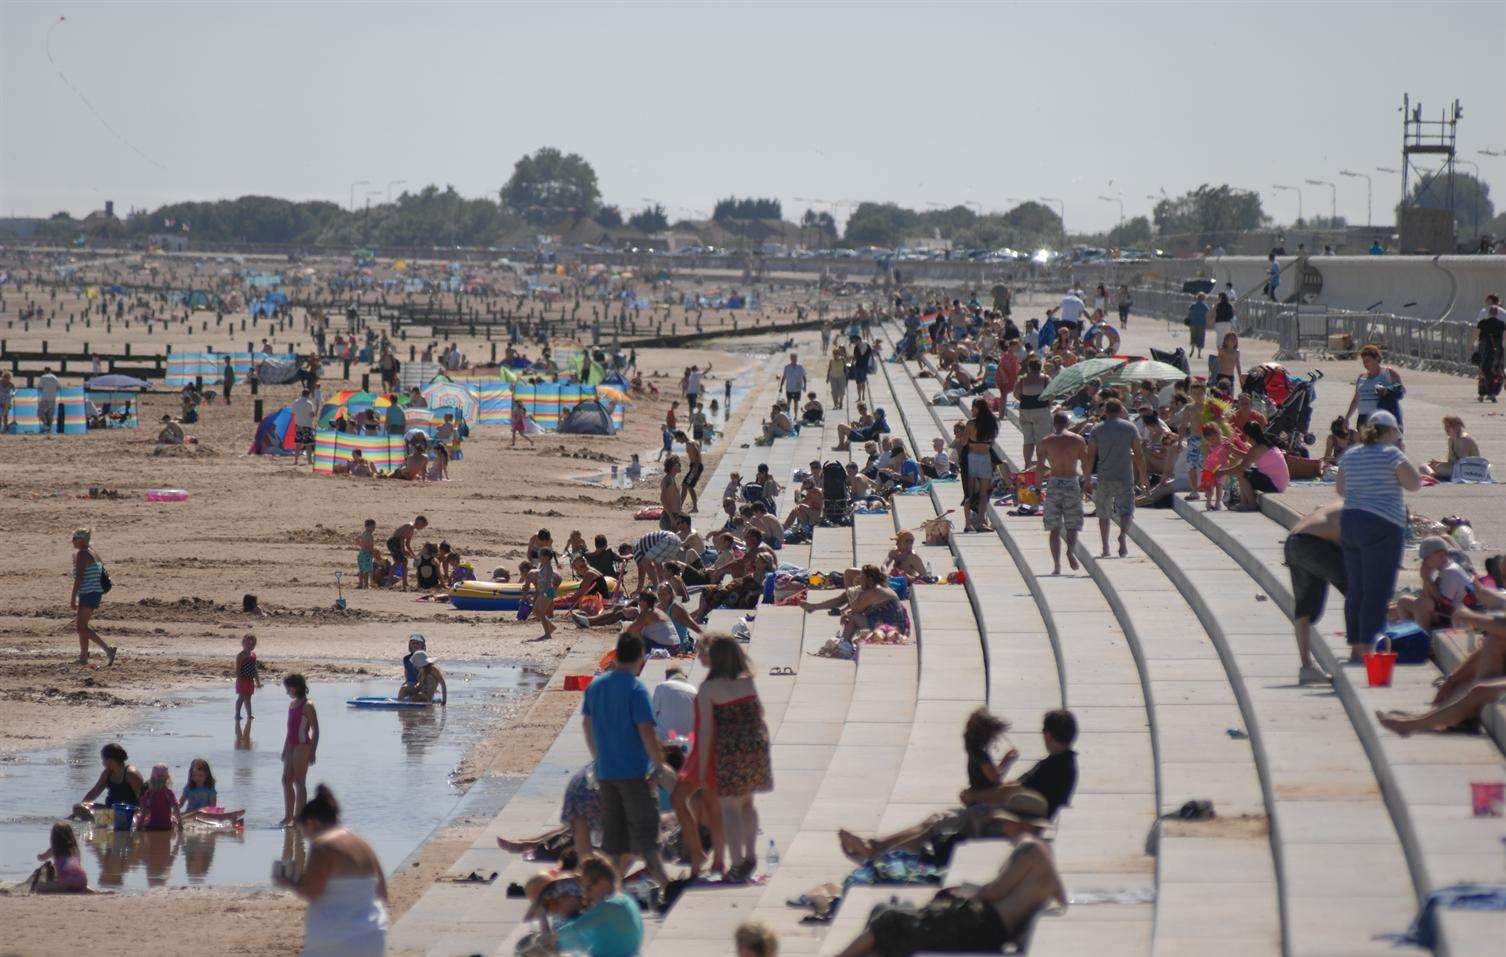 Medical experts have warned people to stay hydrated on the beach in Kent, such as at Dymchurch